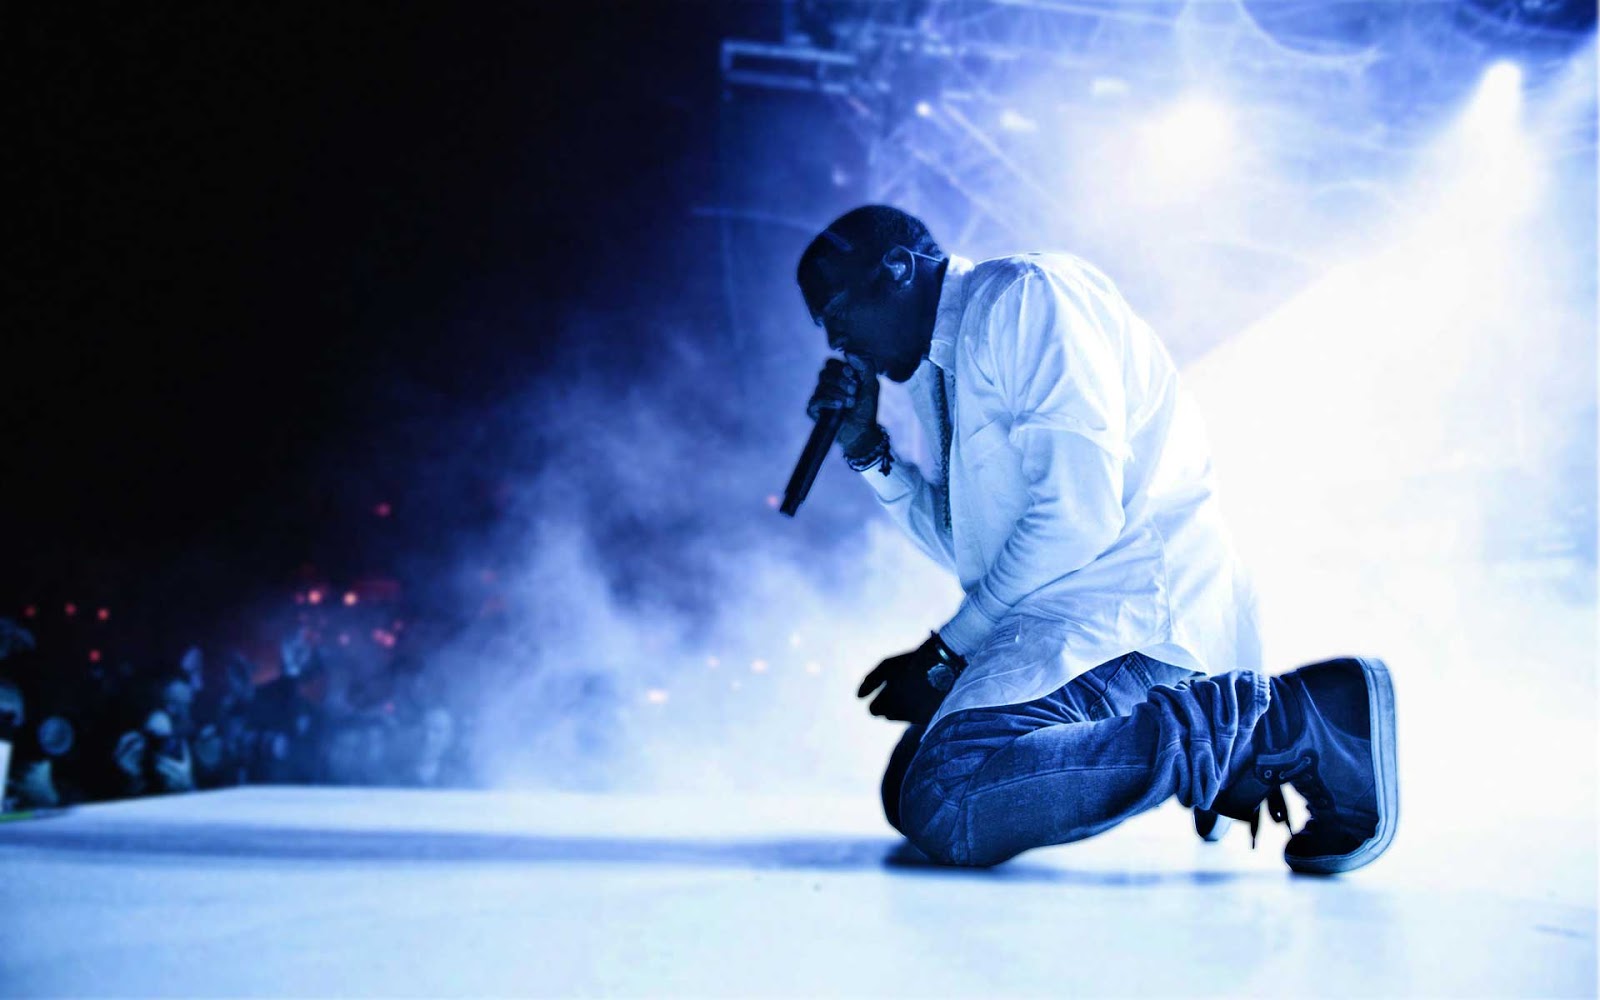 Kanye West Wallpapers 1920x1080 10 Wallpapers Download HD